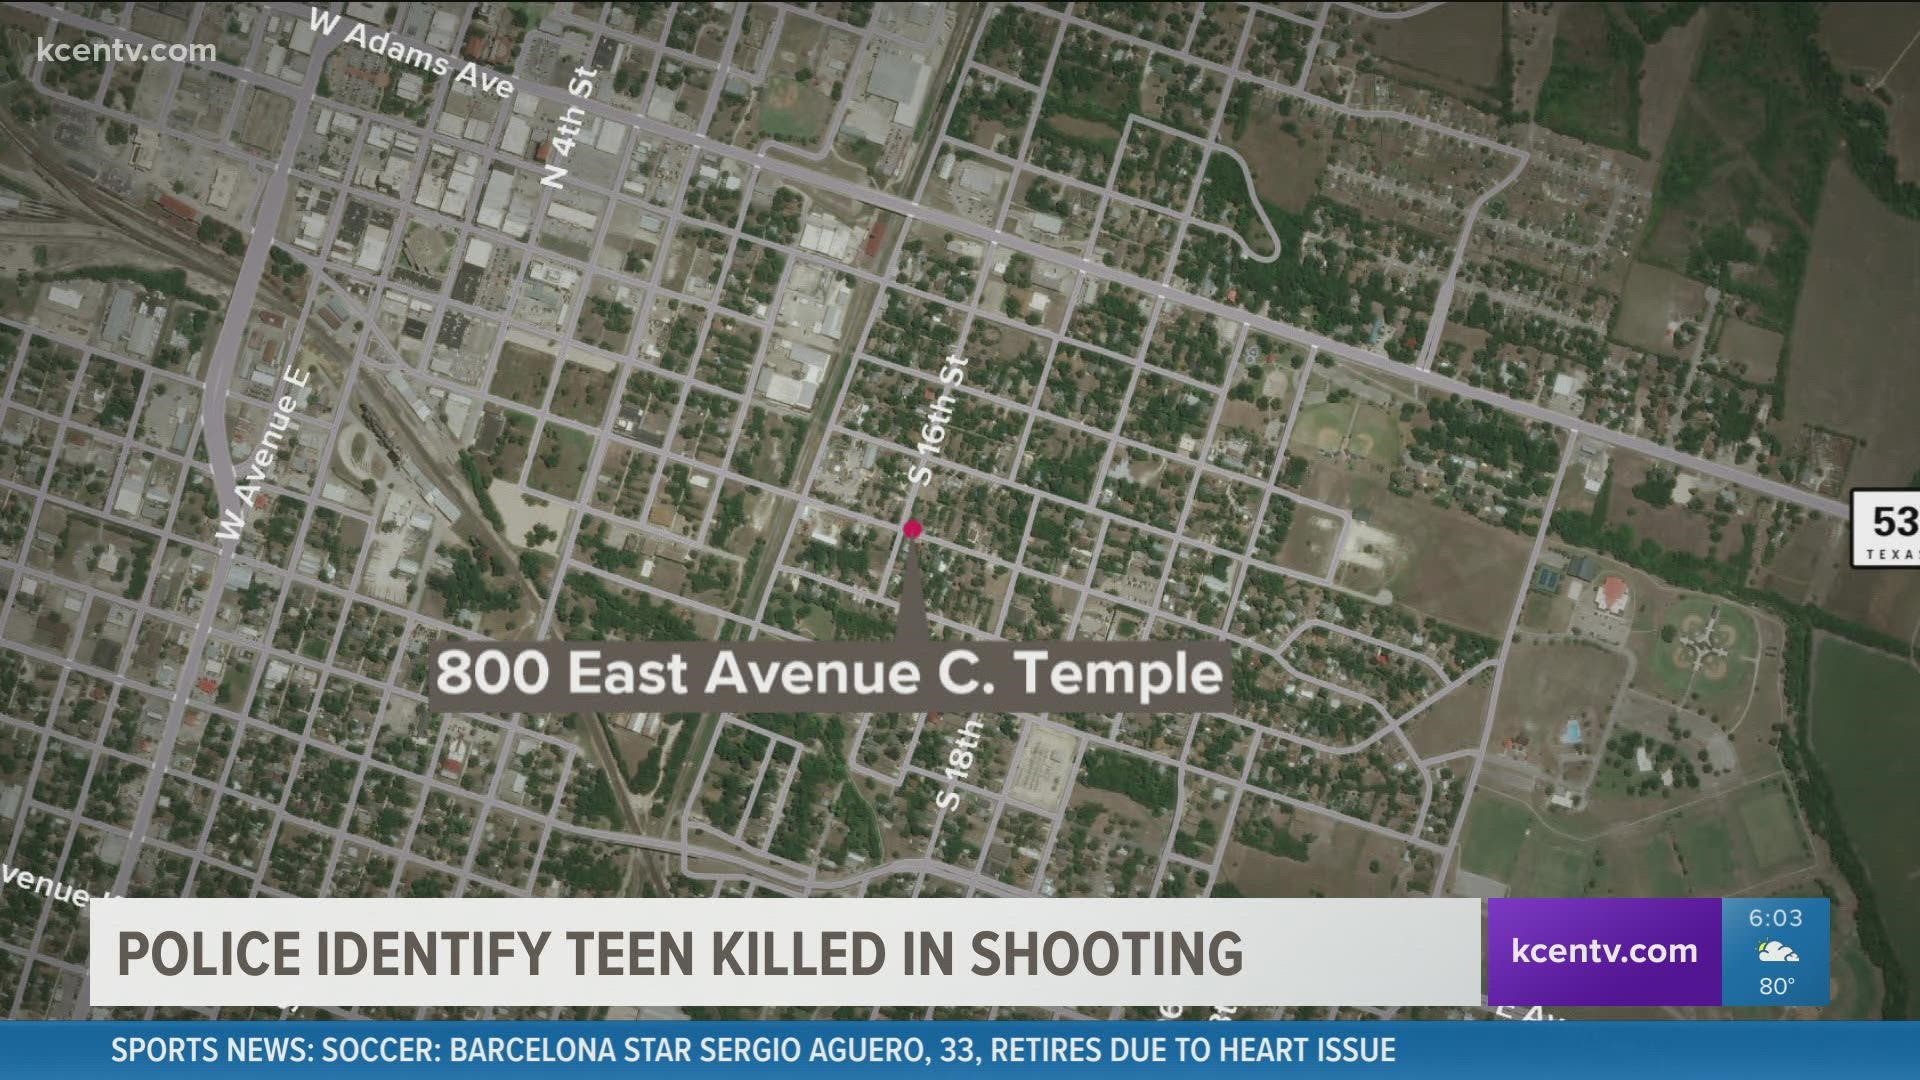 A 17-year-old has been identified by police as the victim in a Monday night Temple shooting. One other unidentified person is in stable condition.